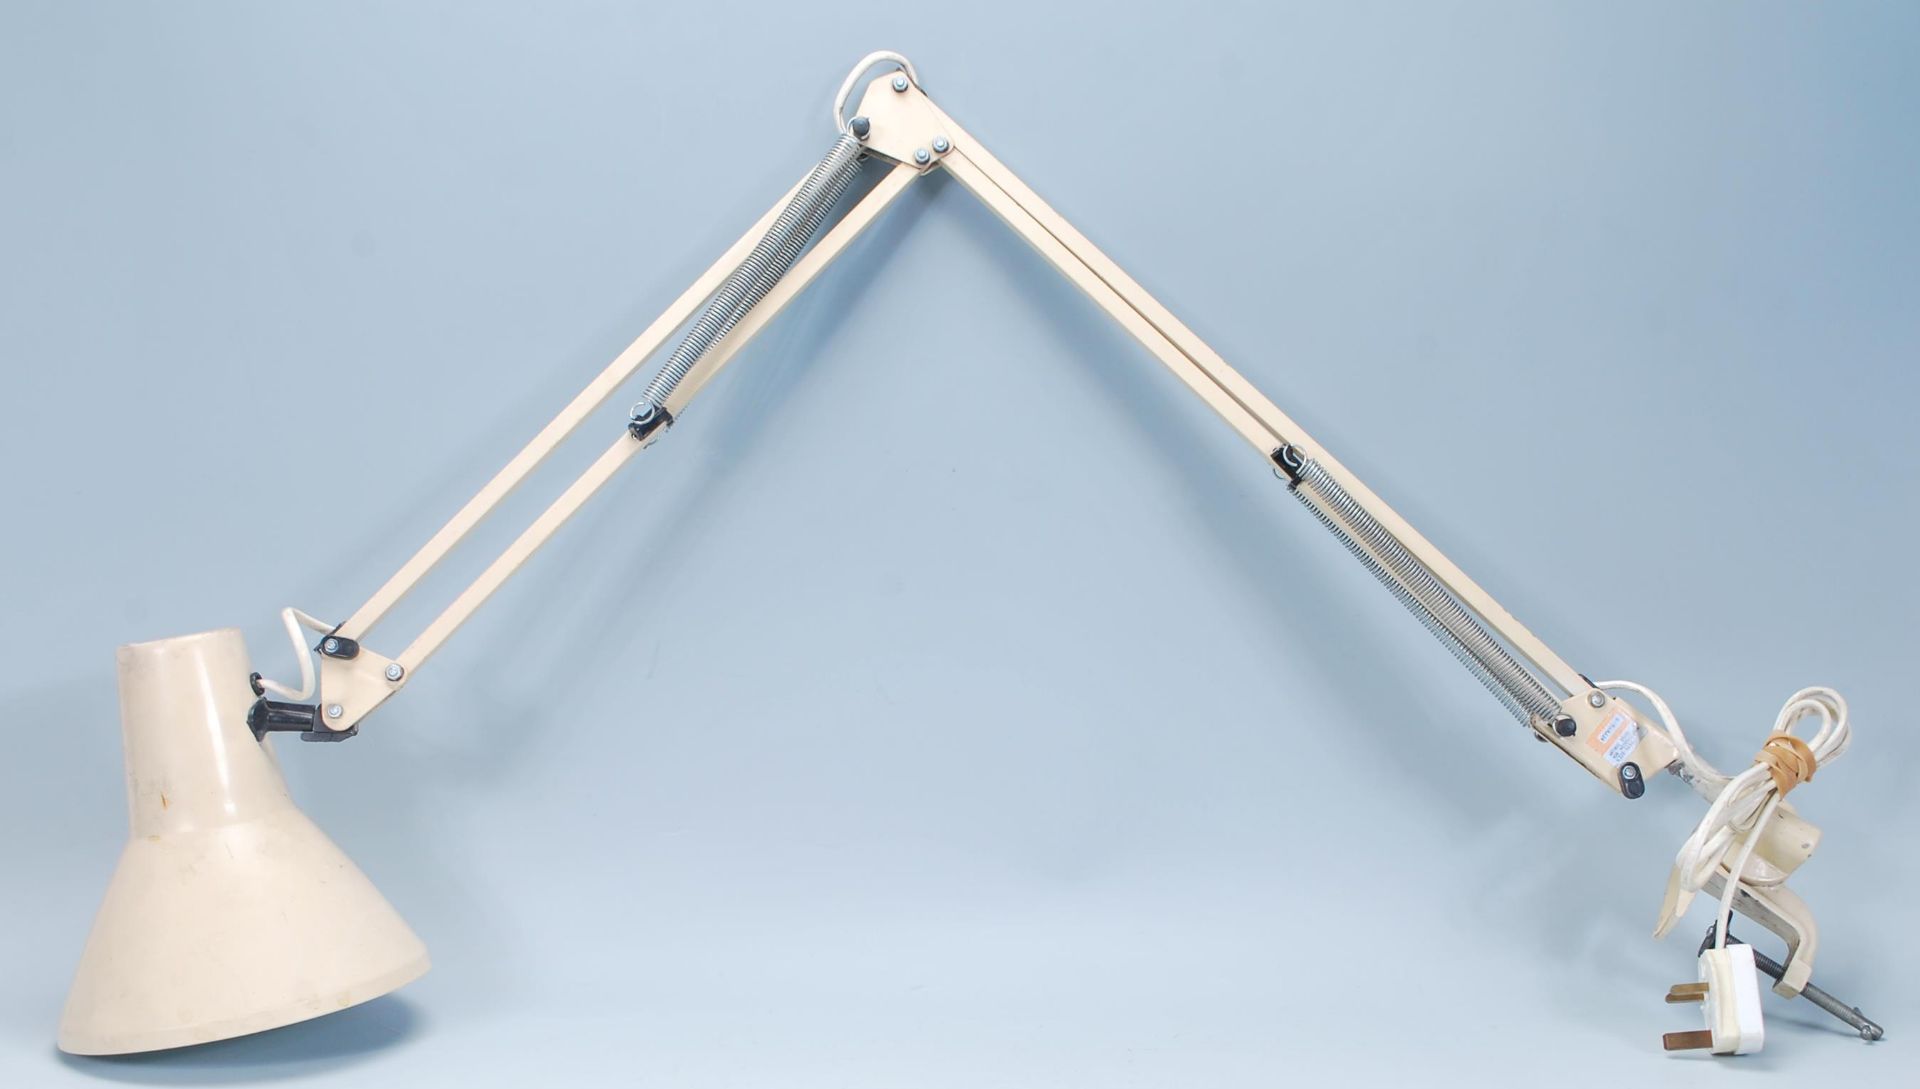 A vintage retro 1970's anglepoise desk lamp having a conical shade on a metamorphic posable arm with